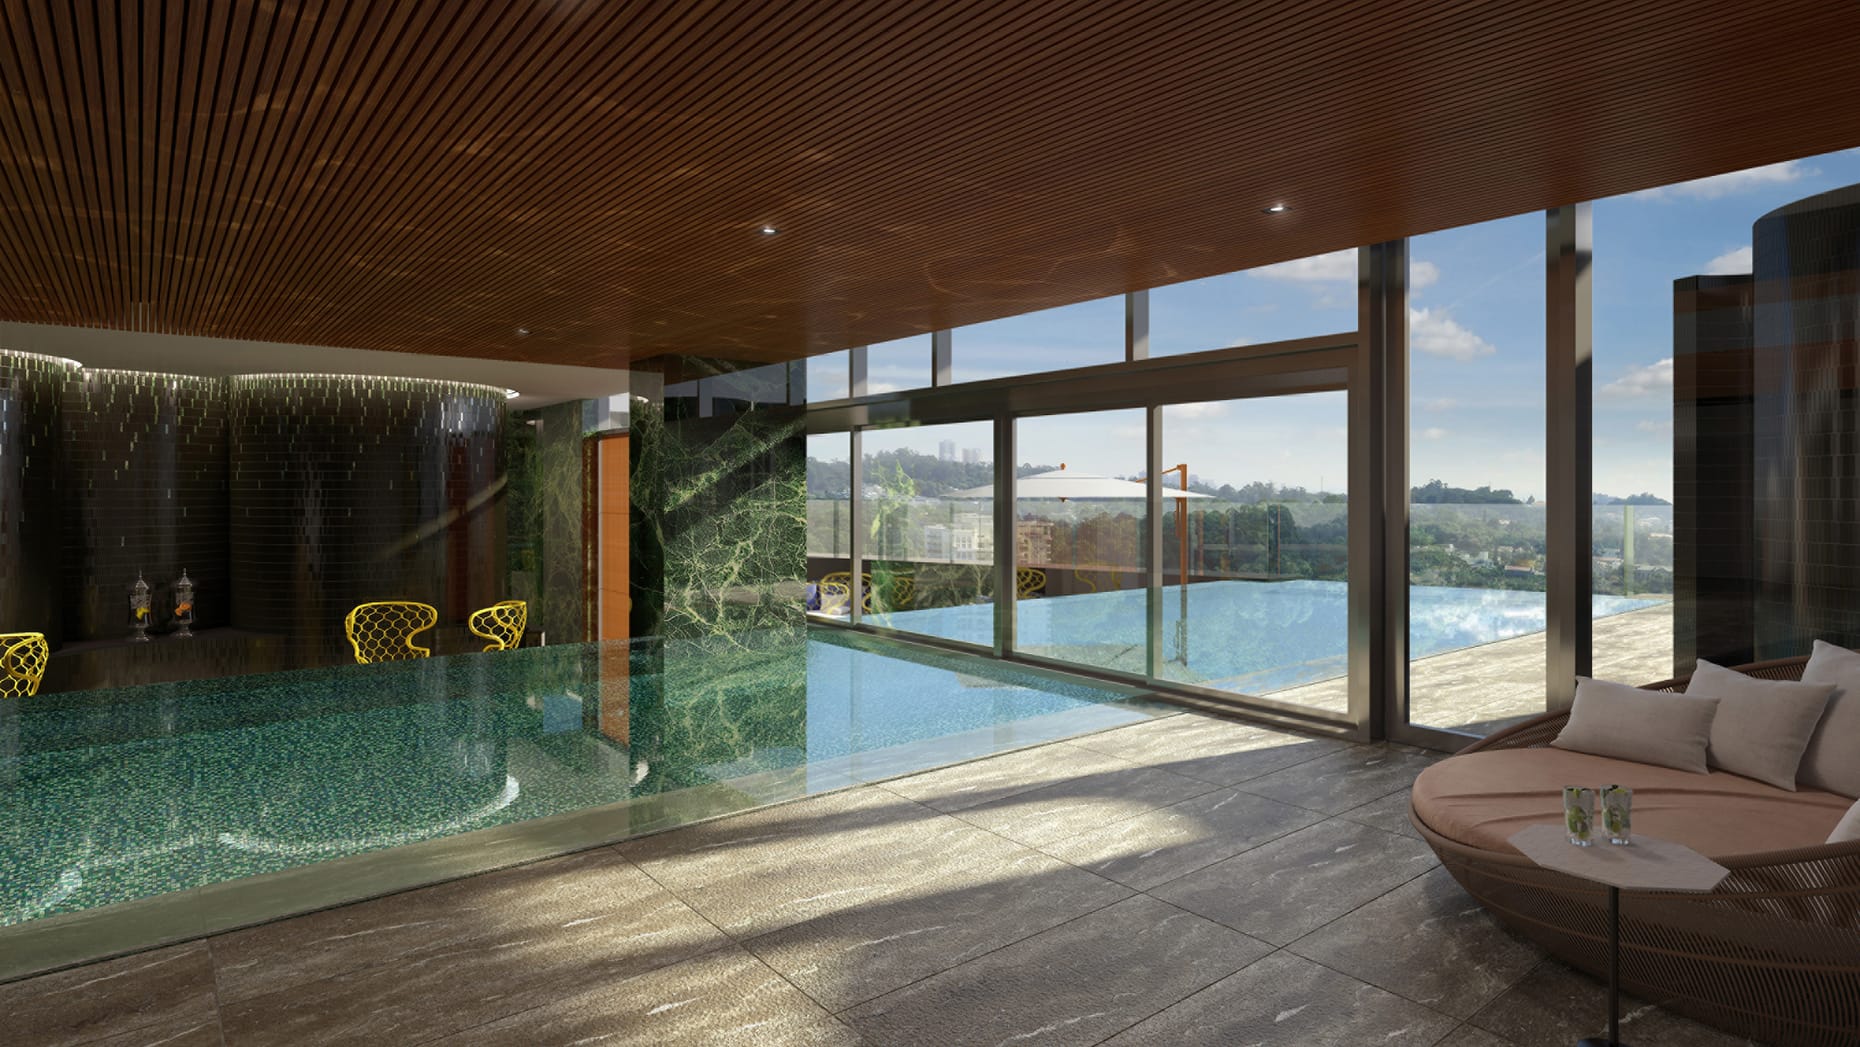 news-main-four-seasons-hotel-and-residences-sao-paulo-at-nacoes-unidas-opens-in-brazil.1539705040.jpg